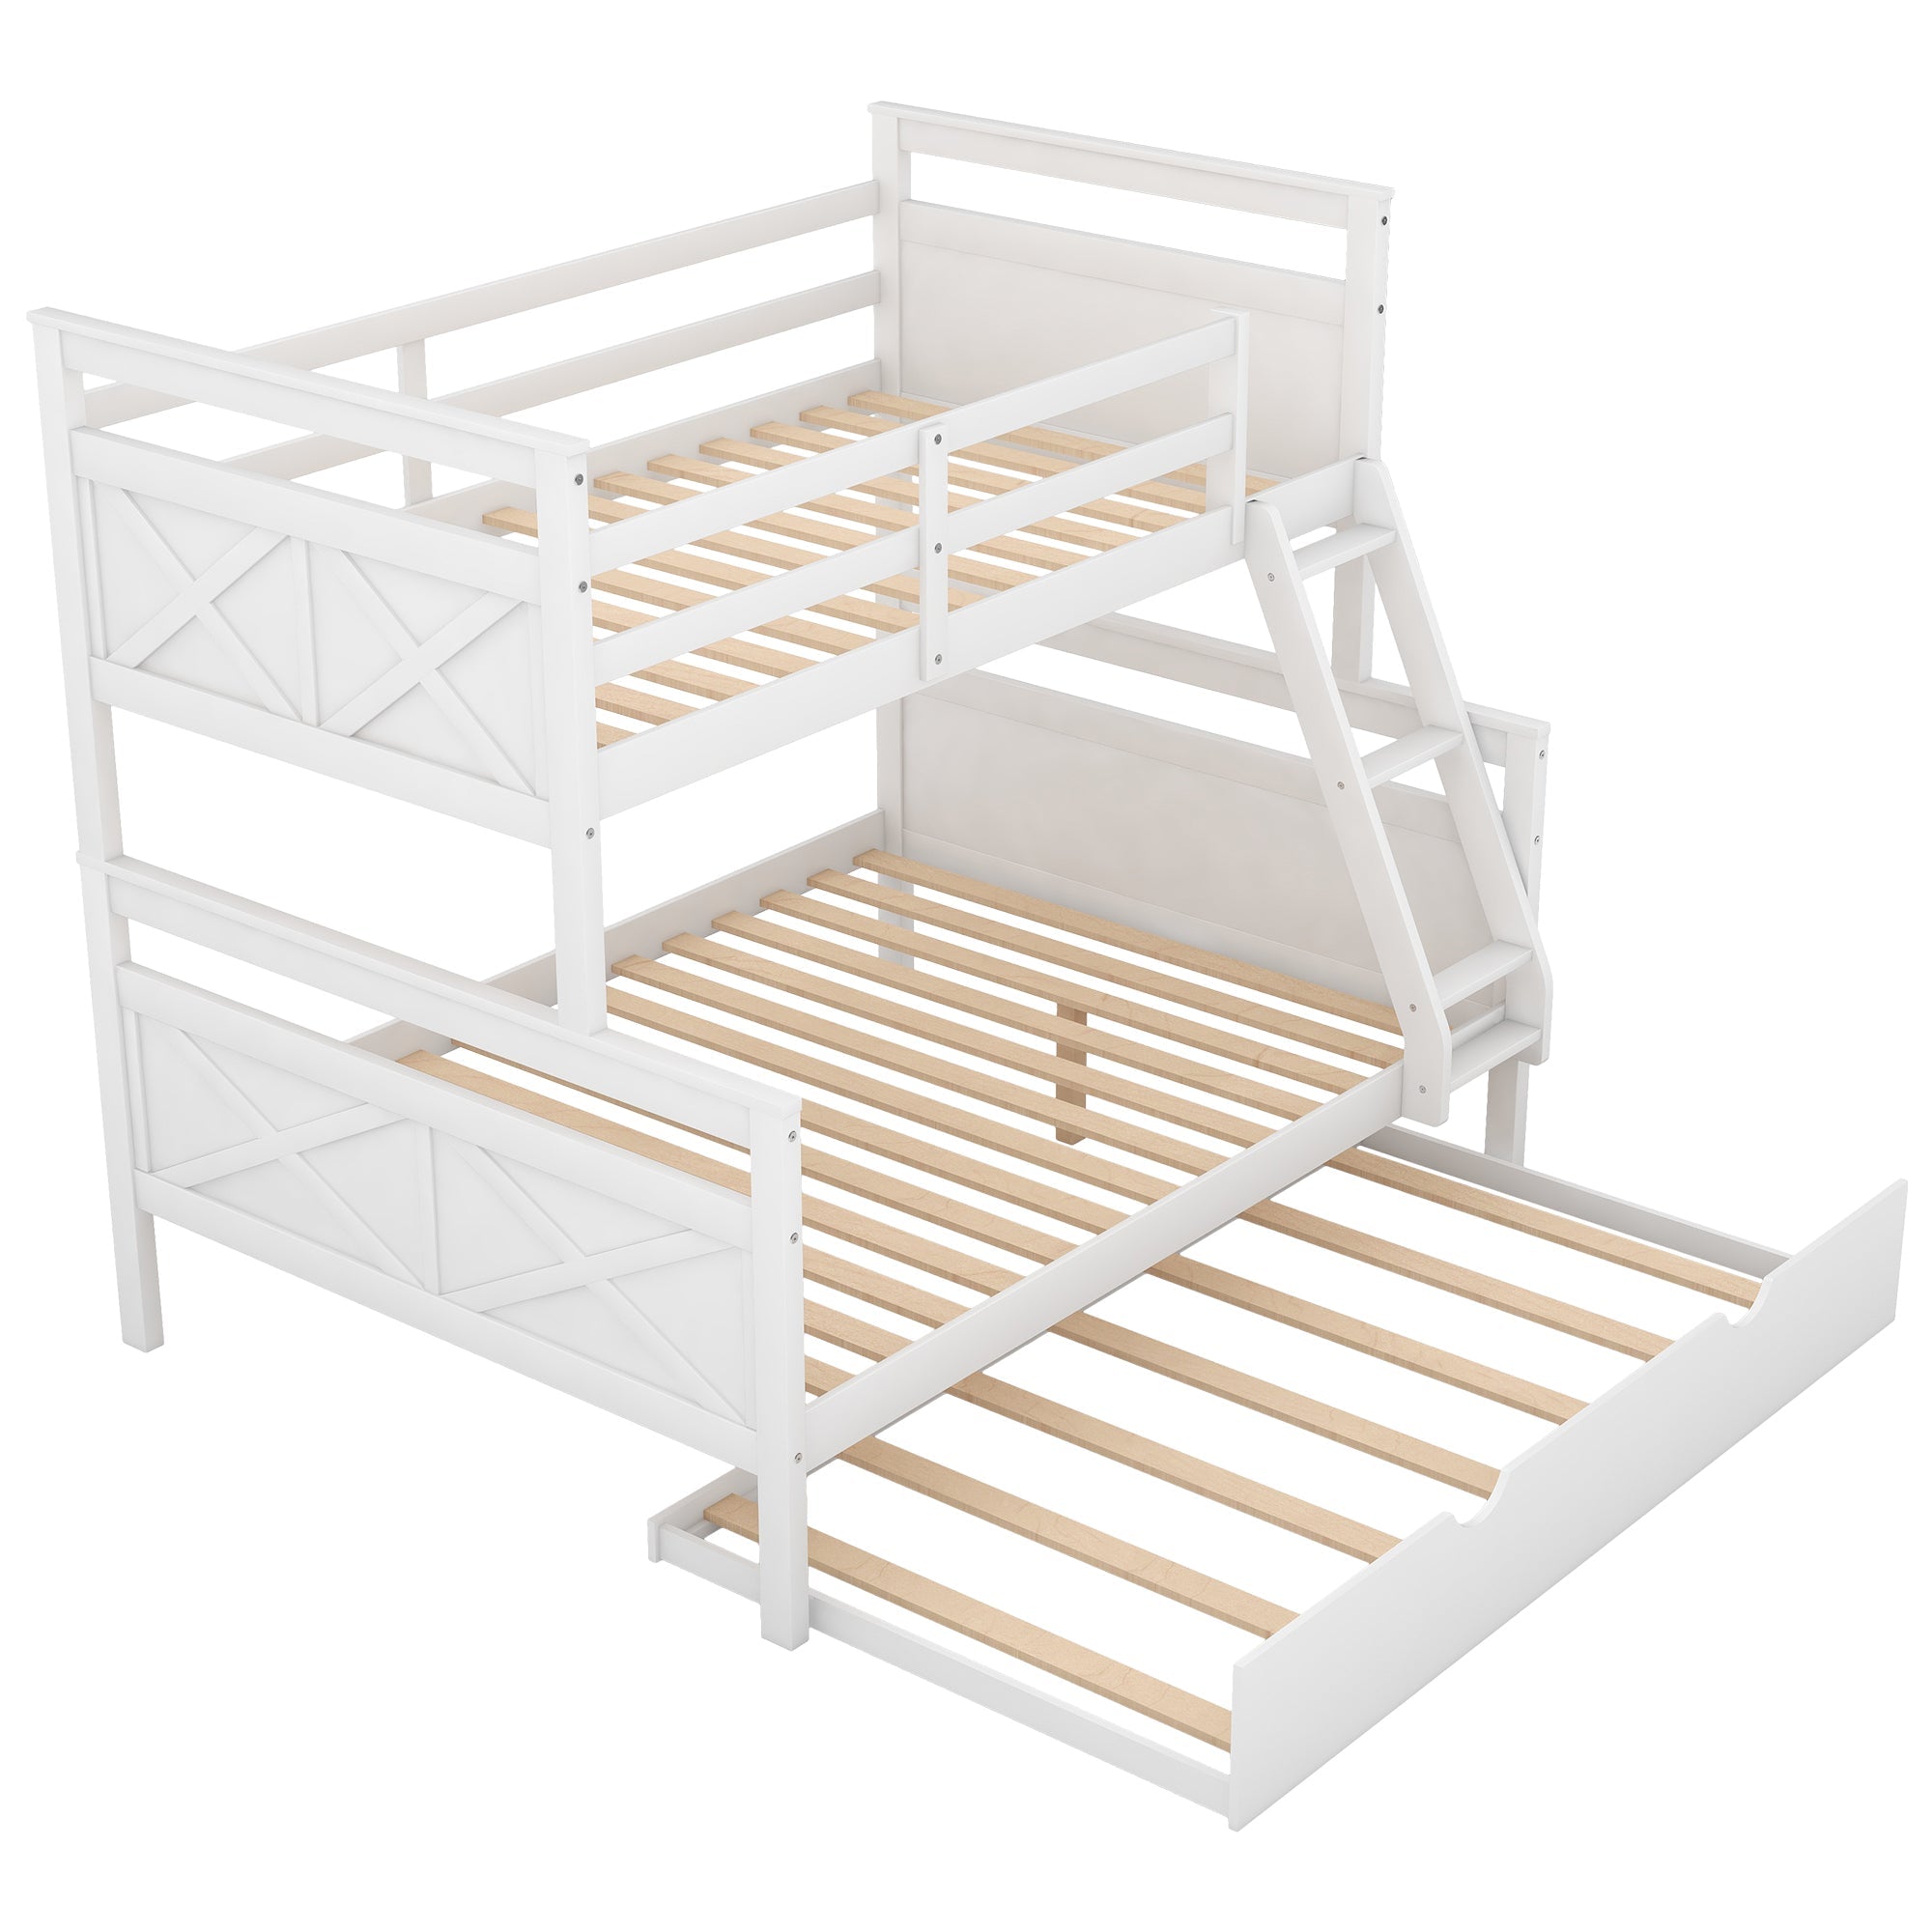 Euroco Wood Twin over Full Bunk Bed with Trundle for Kids & Adults for Bedrooms, White